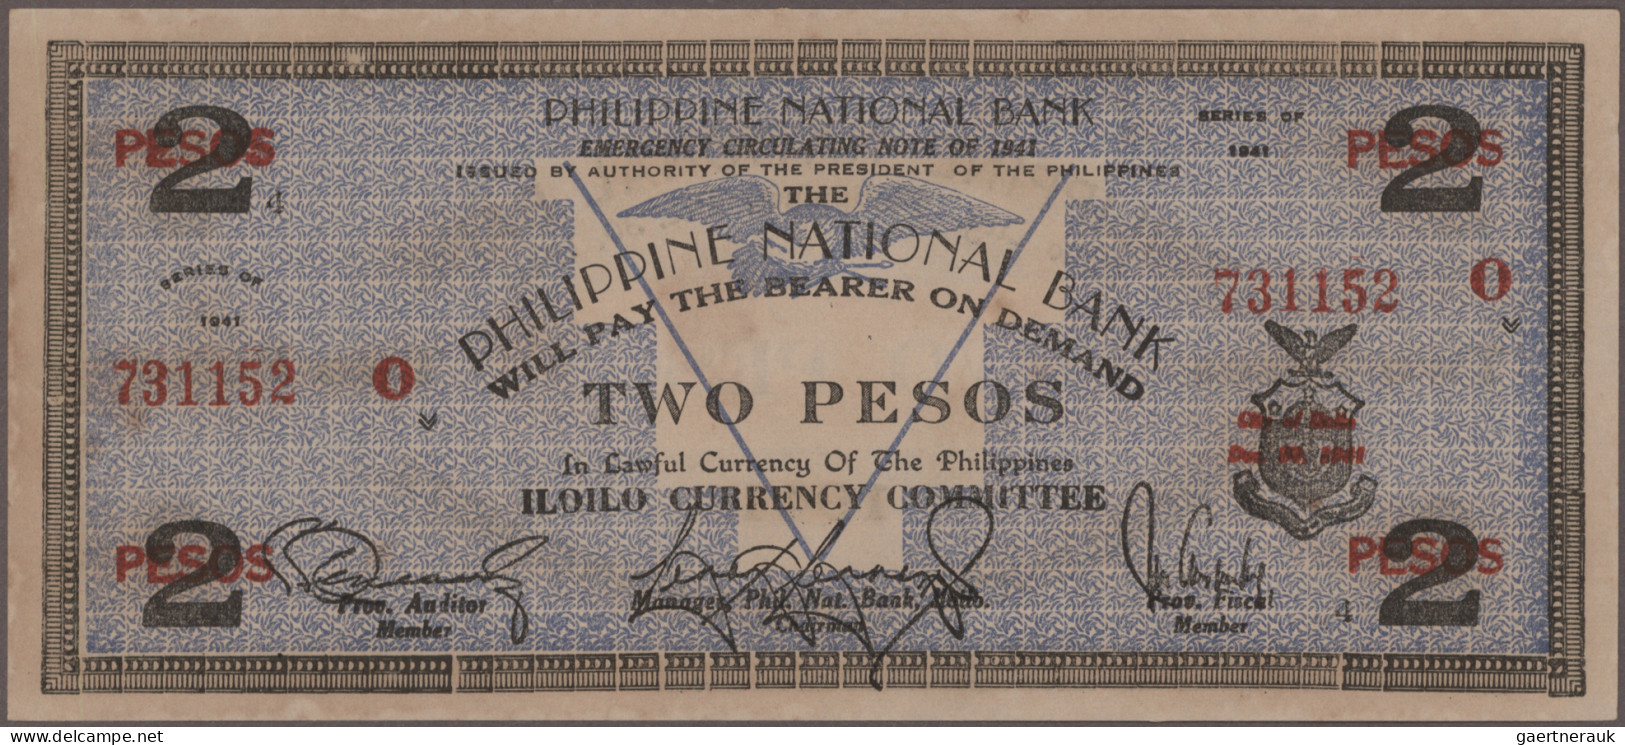 Philippines: Collectors album with 132 banknotes Emergency Issues WWII, series 1